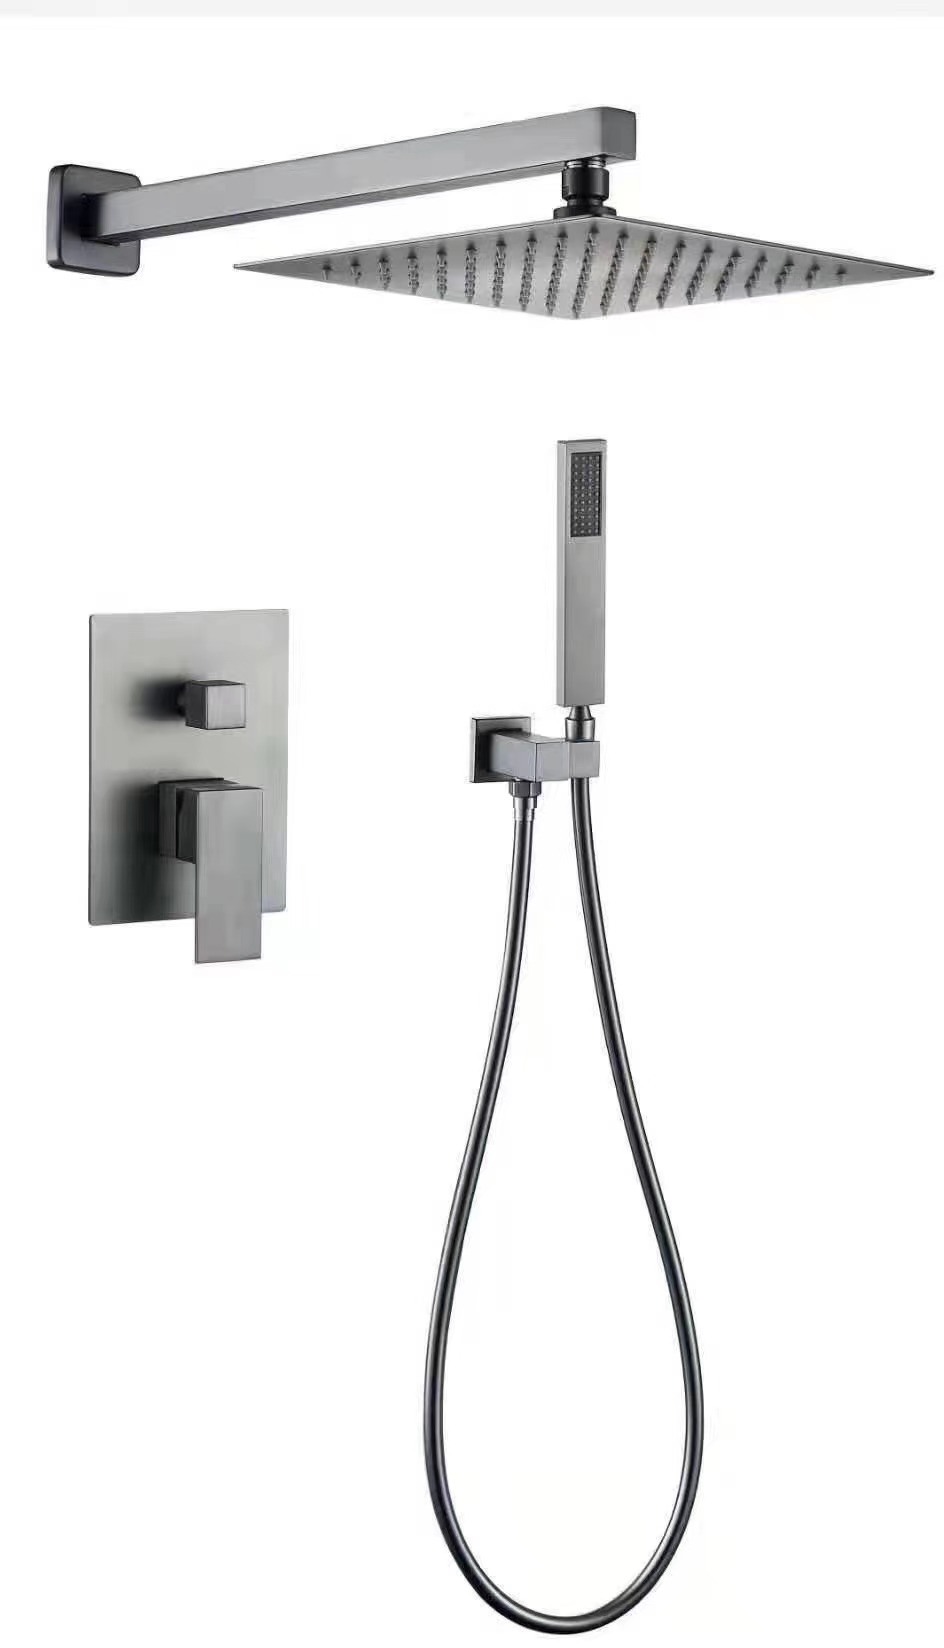 2 or 3 Function Wall Mounted ABS or Ss Shower Set Faucet